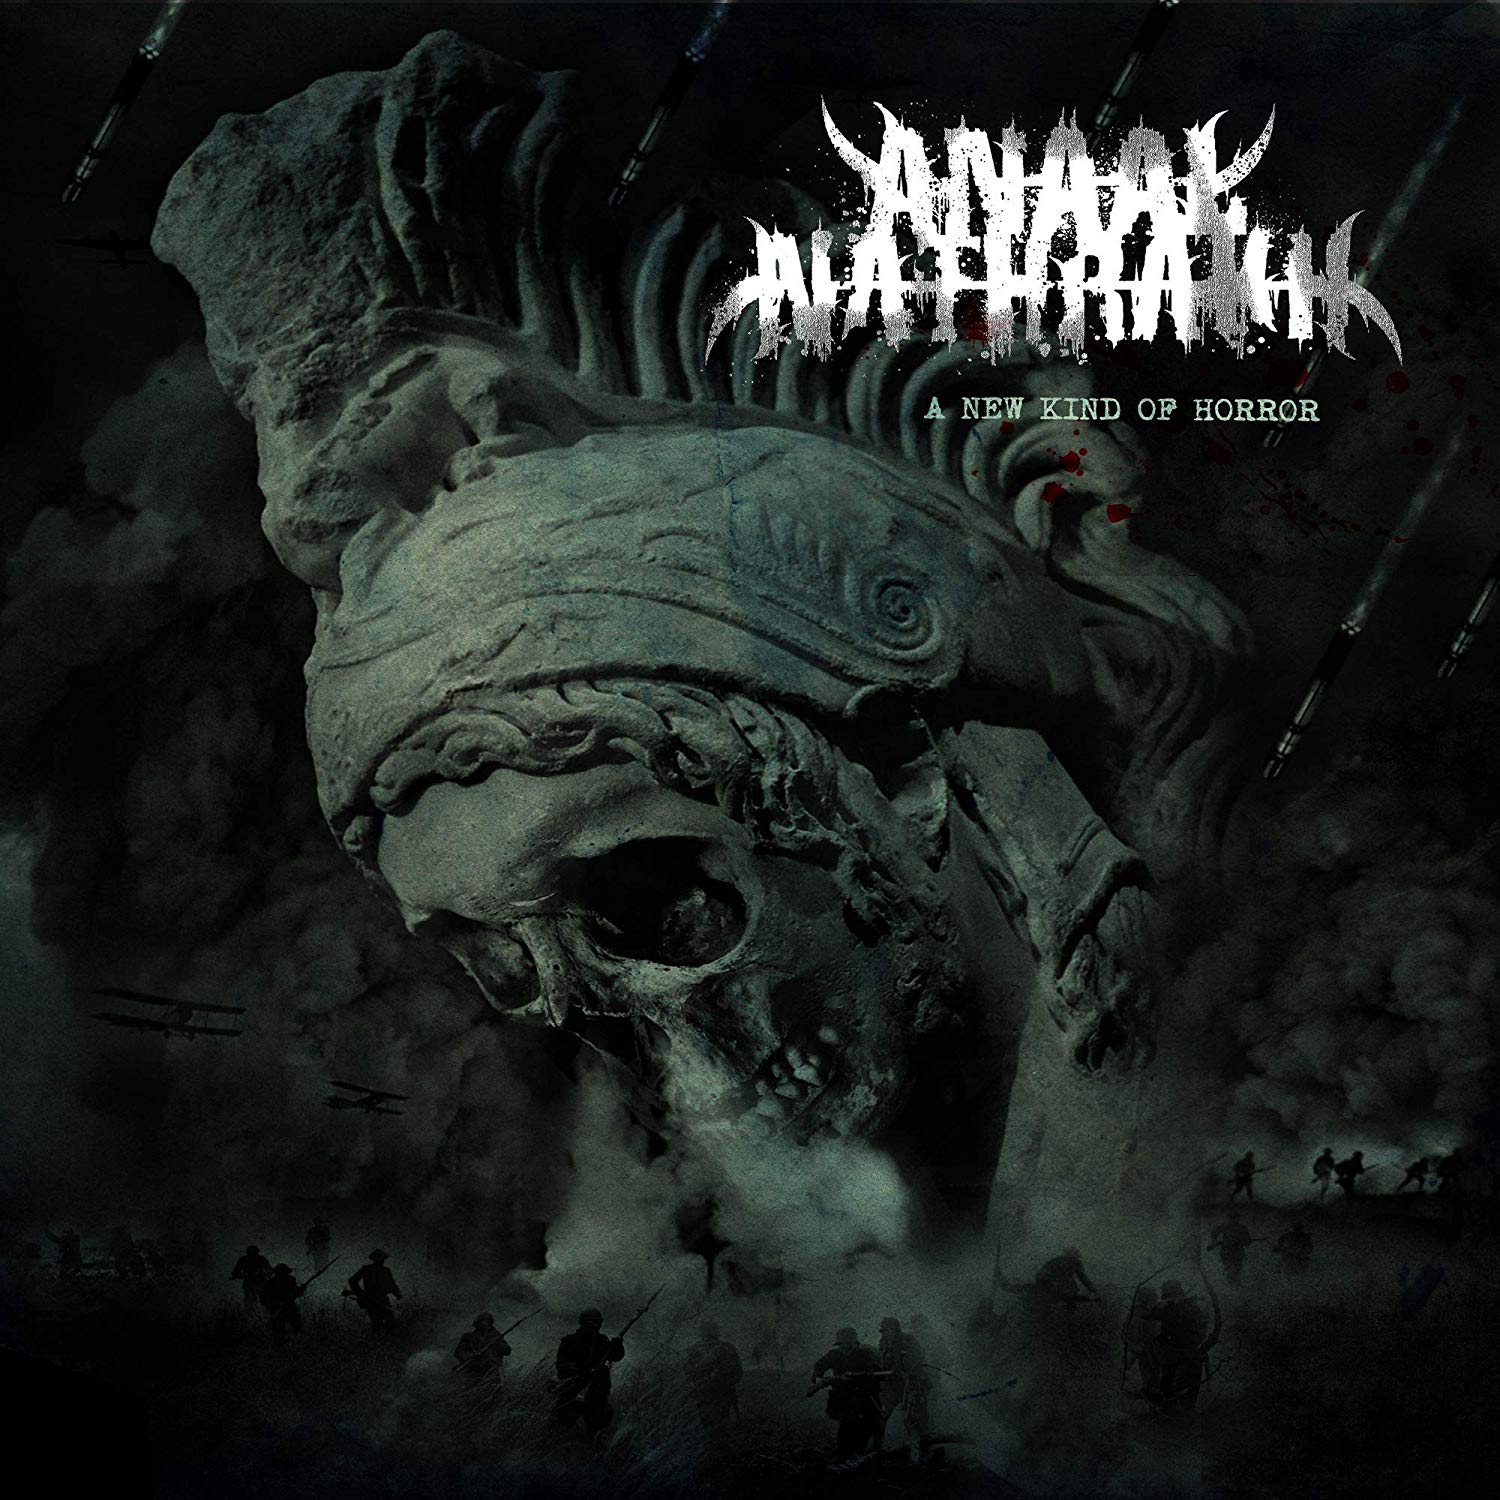 Anaal Nathrakh streaming new song “New Bethlehem/Mass Death Futures”